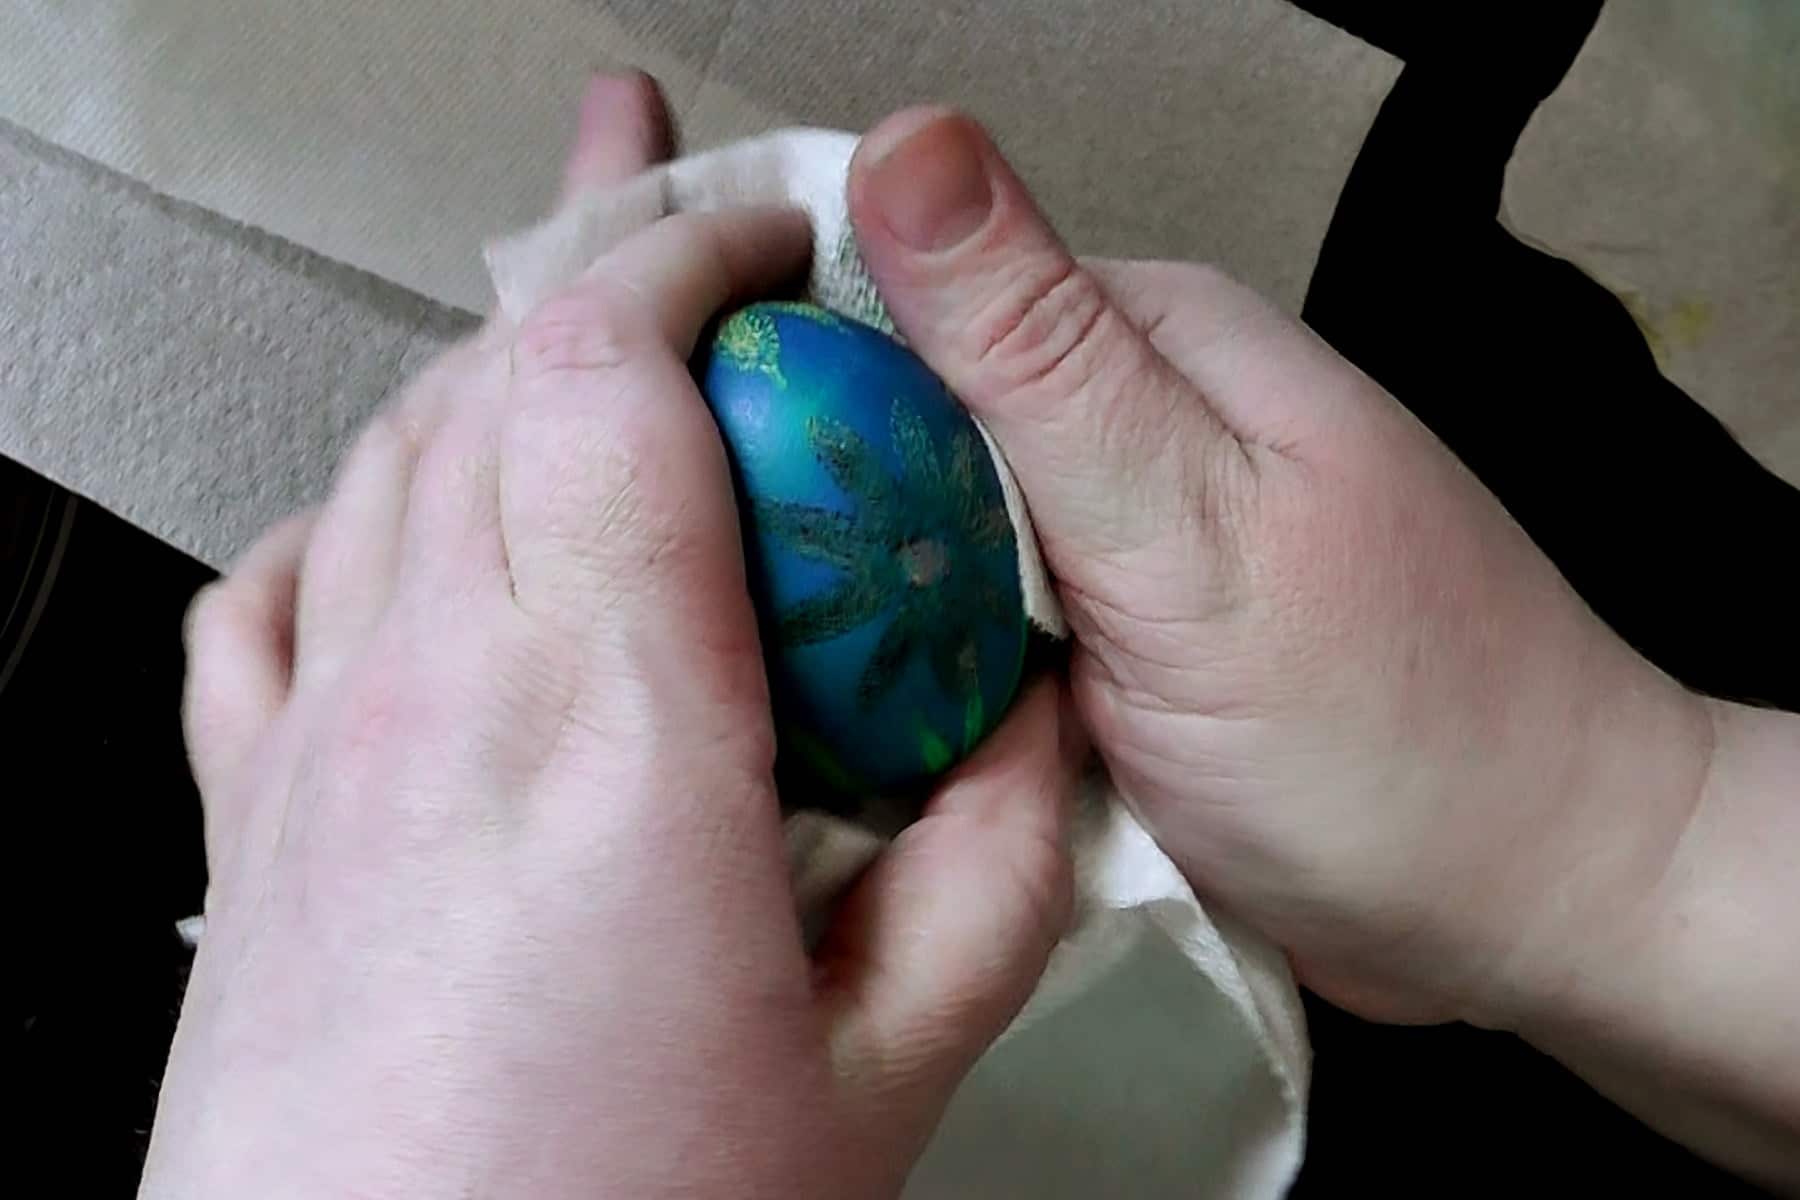 Two hands are shown rubbing melted wax off a pysanky egg. The egg is blue and has daisies on it.